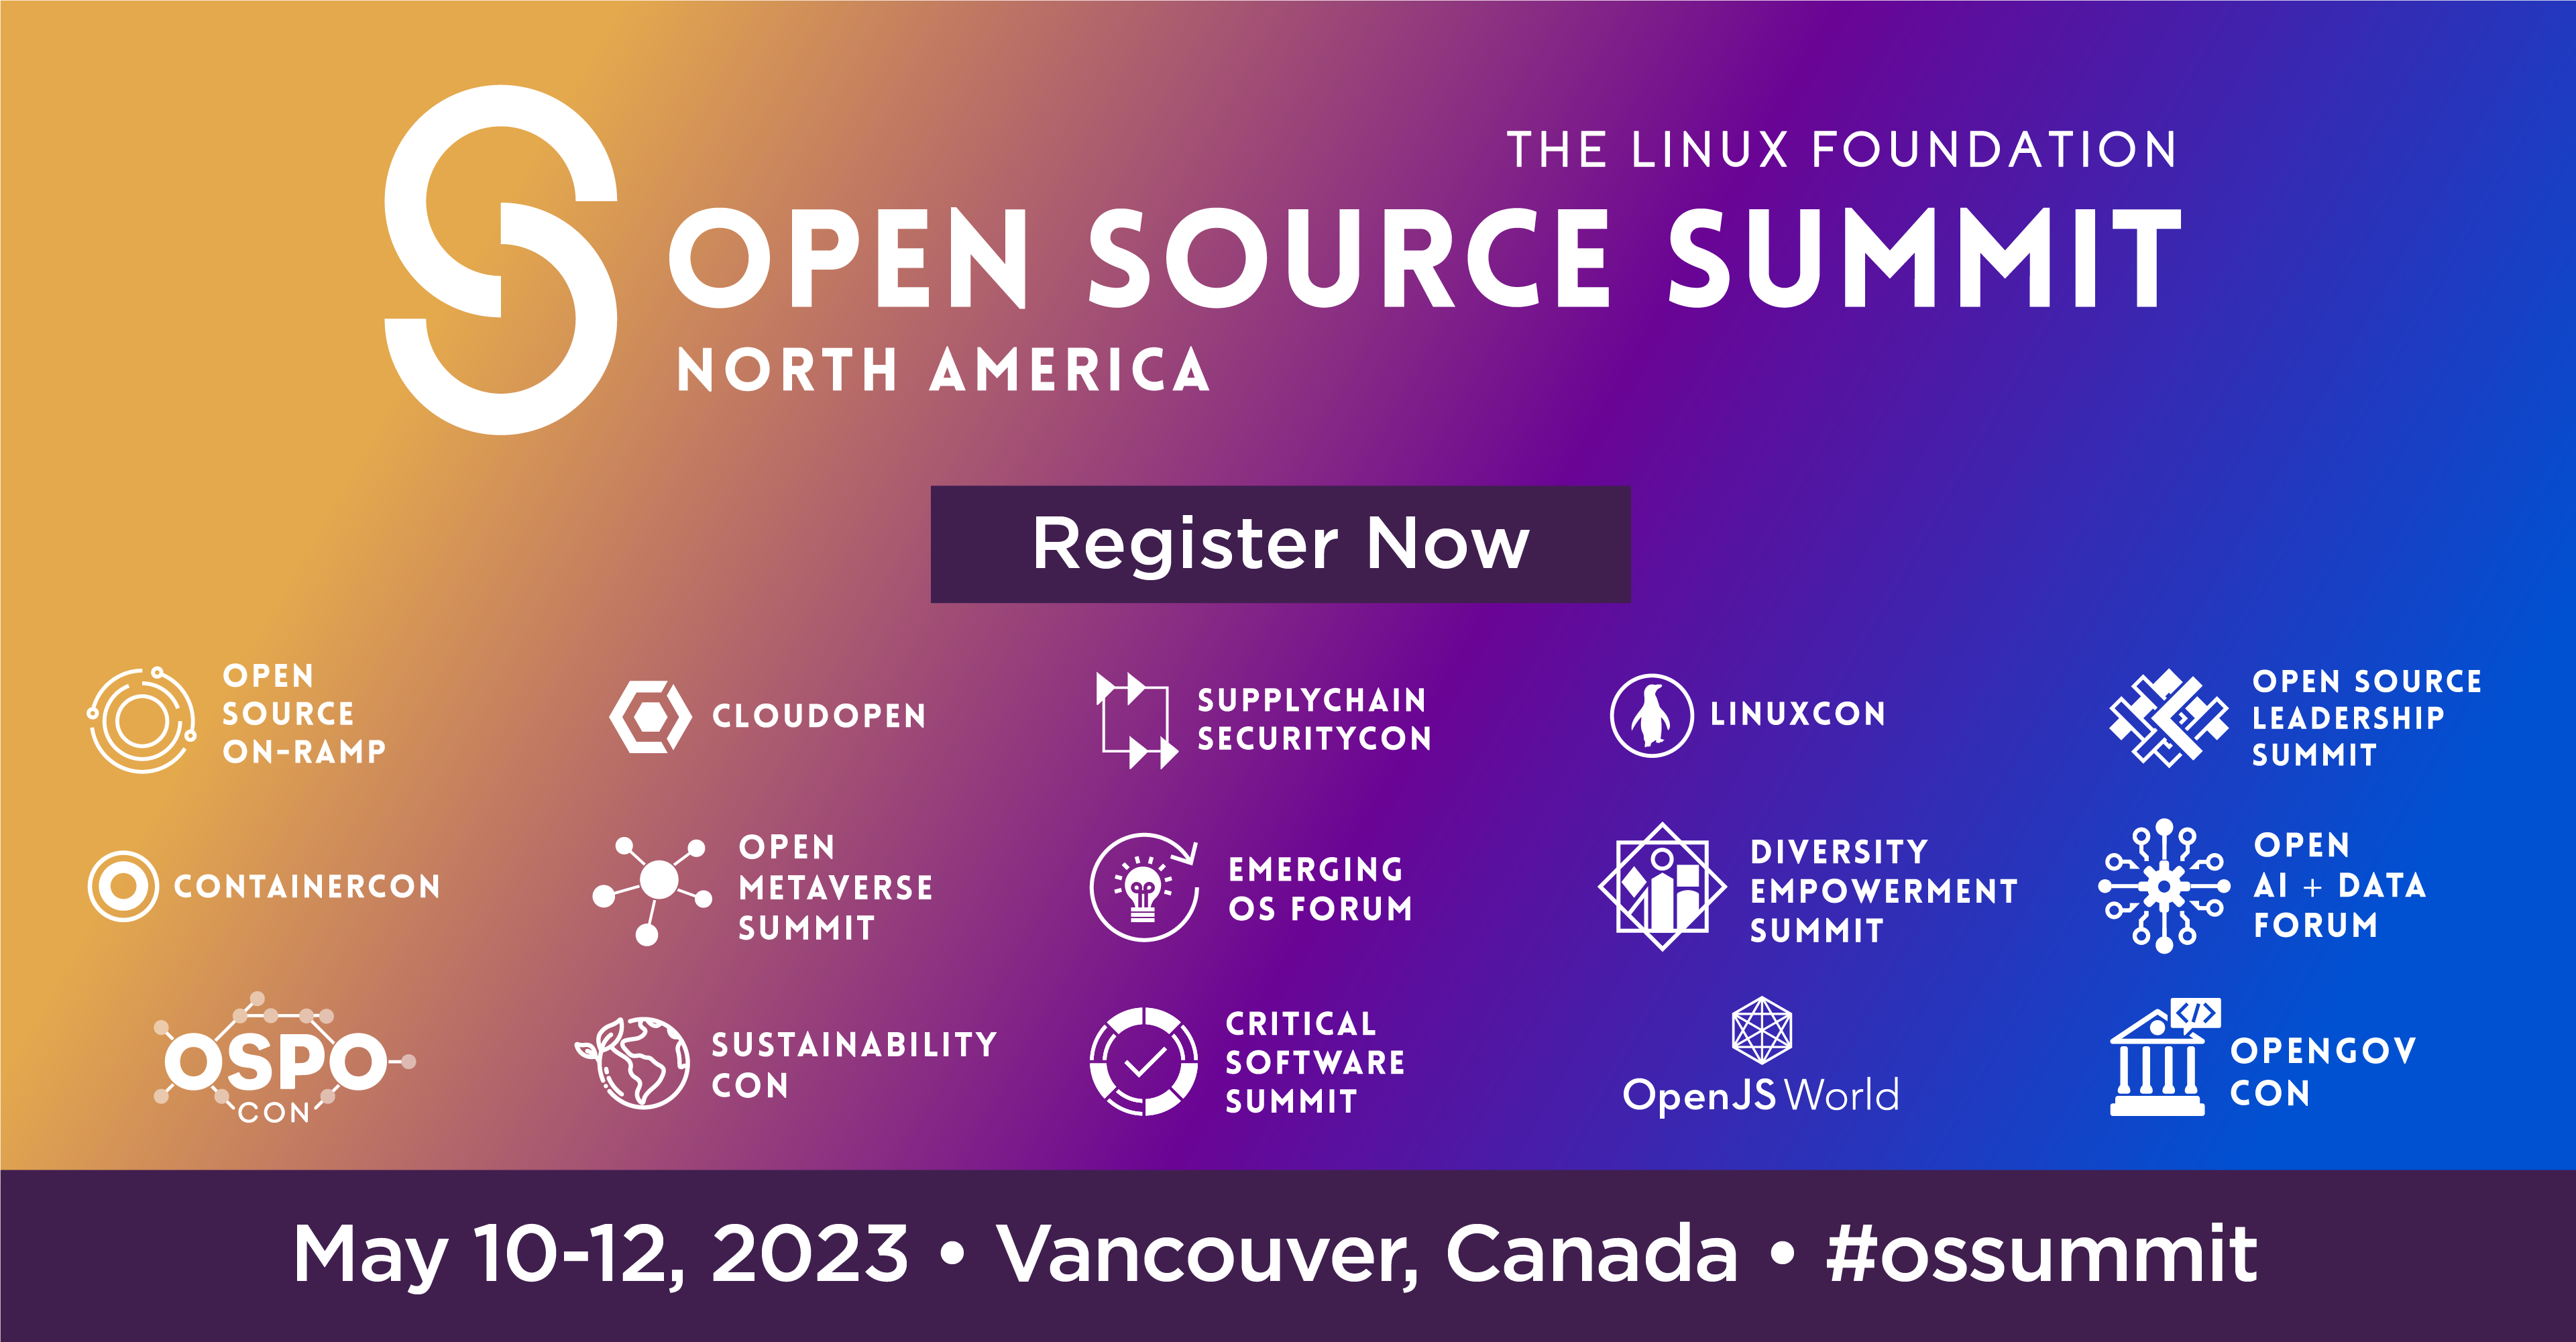 Register now for Open Source Summit North America 2023 in Vancouver, Canada.